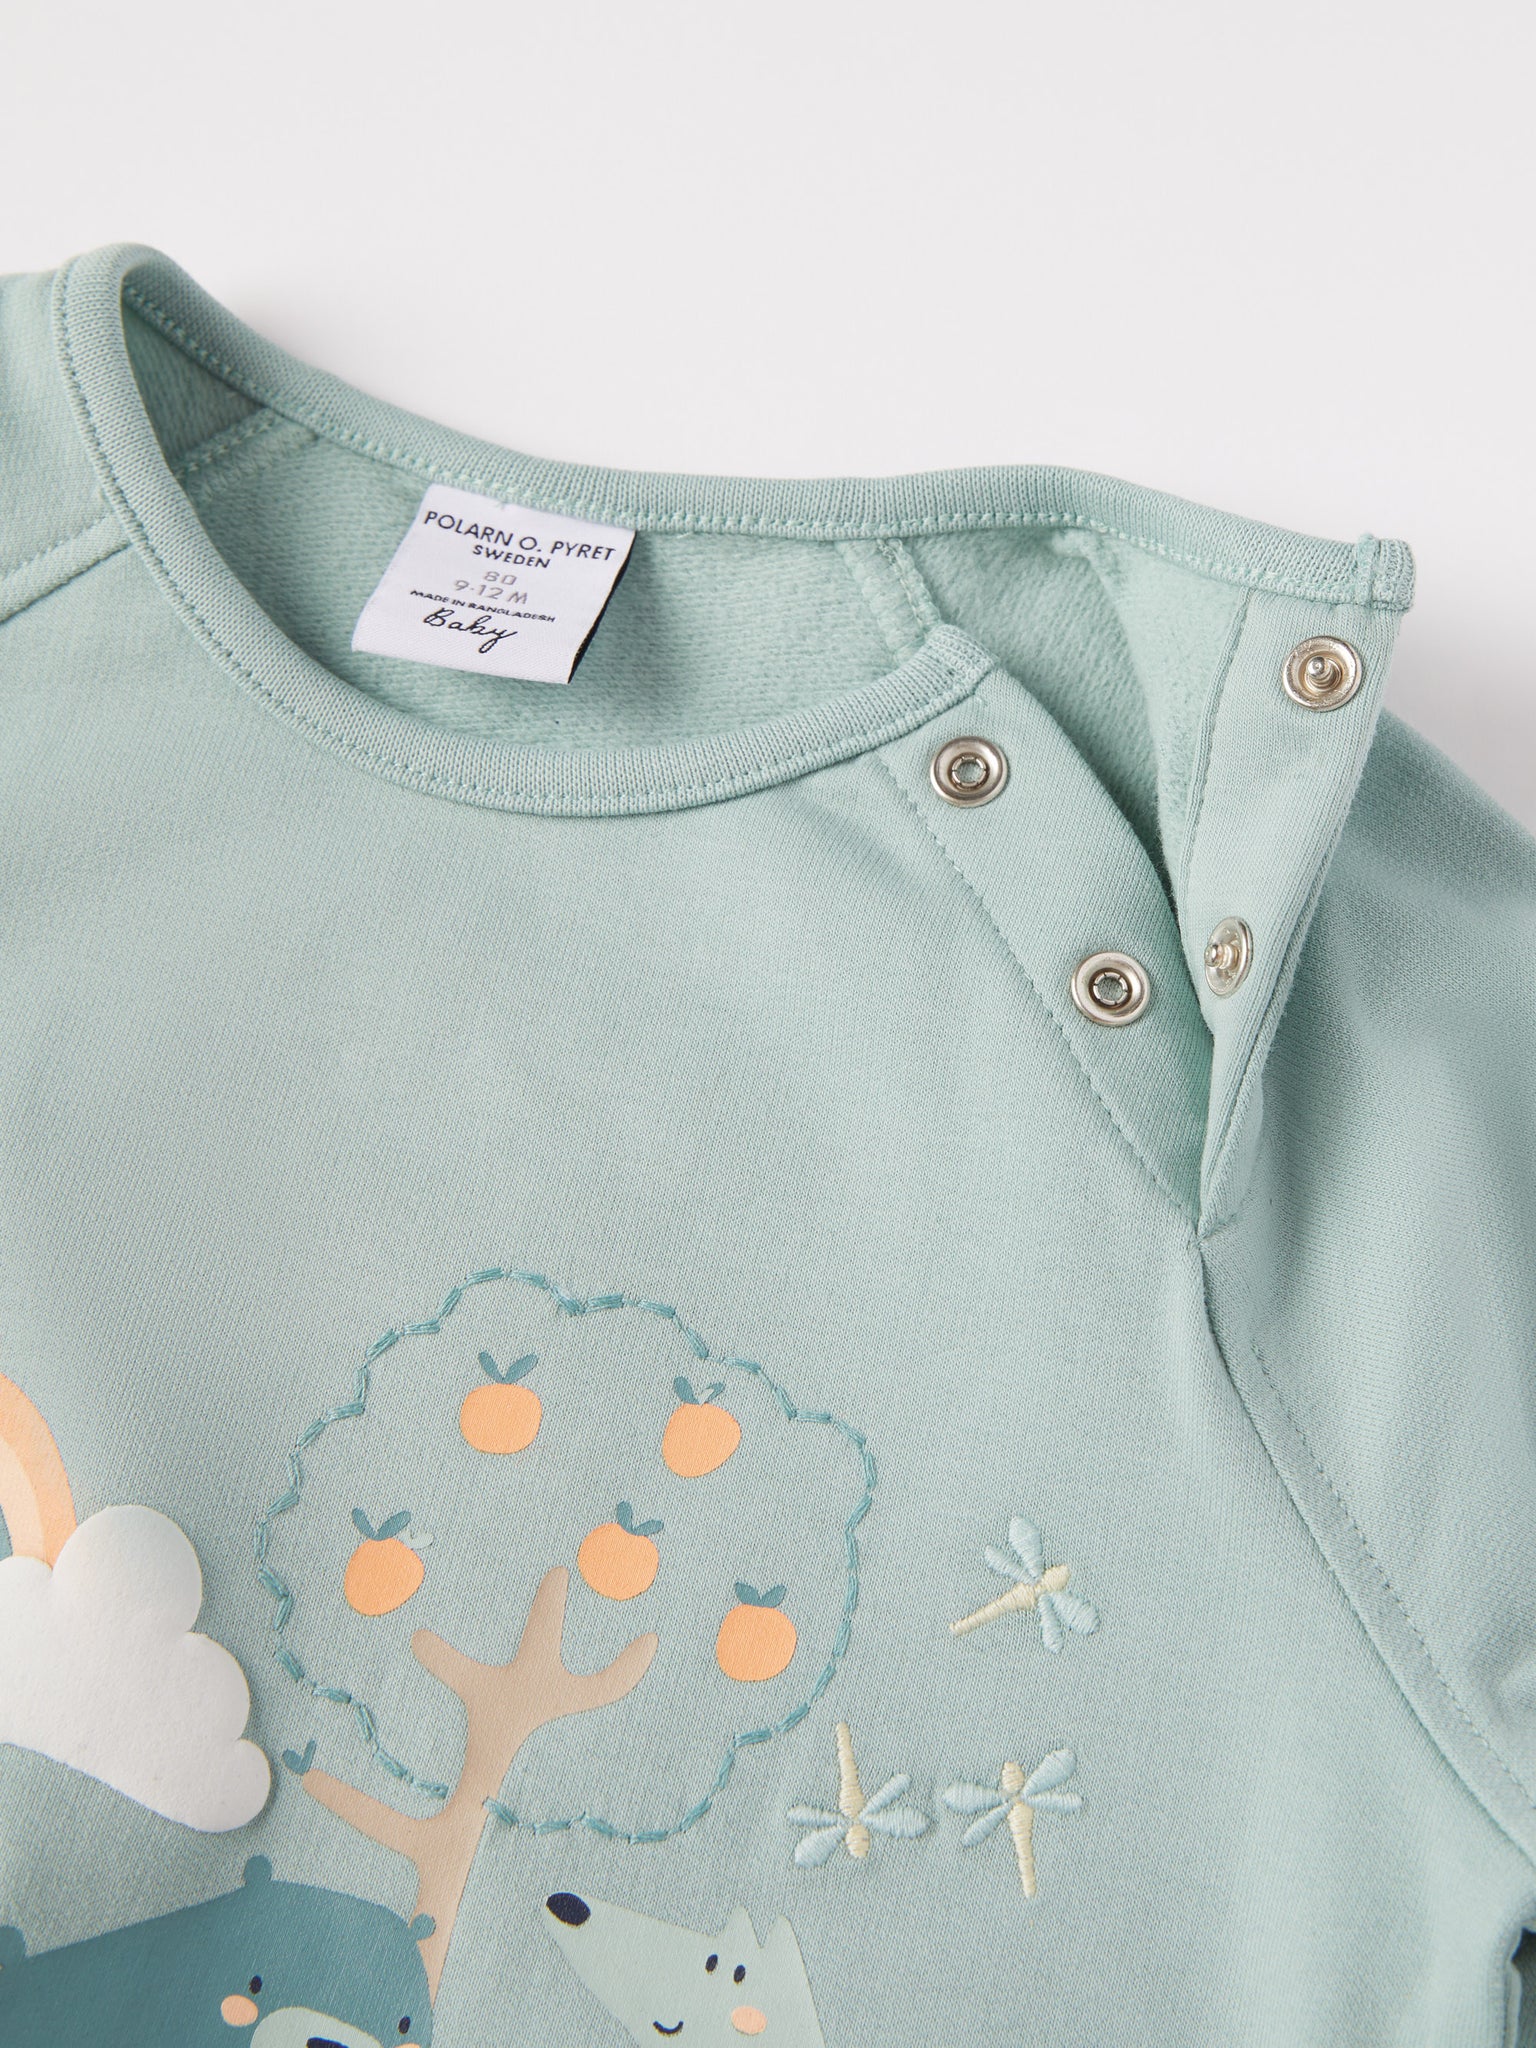 Animal Print Baby Top from the Polarn O. Pyret baby collection. The best ethical kids clothes